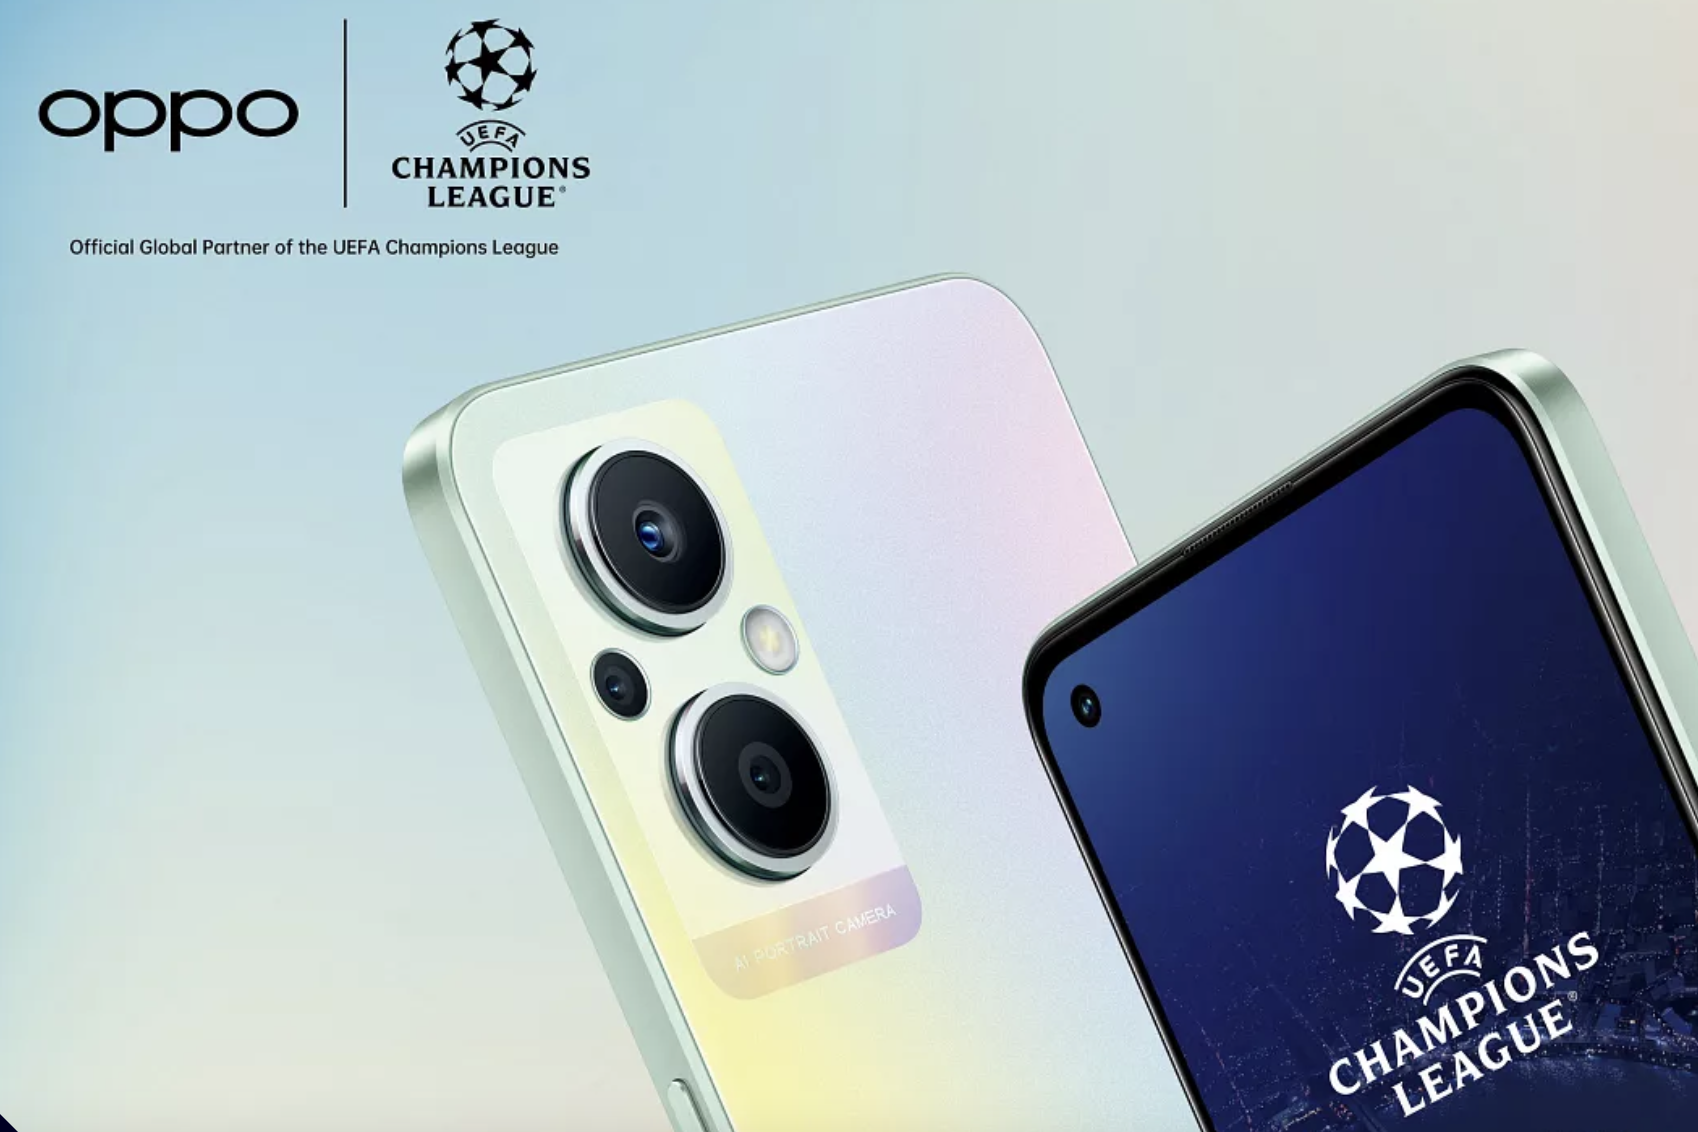 OPPO goes online for the last two years of the UEFA Champions League rights cycle